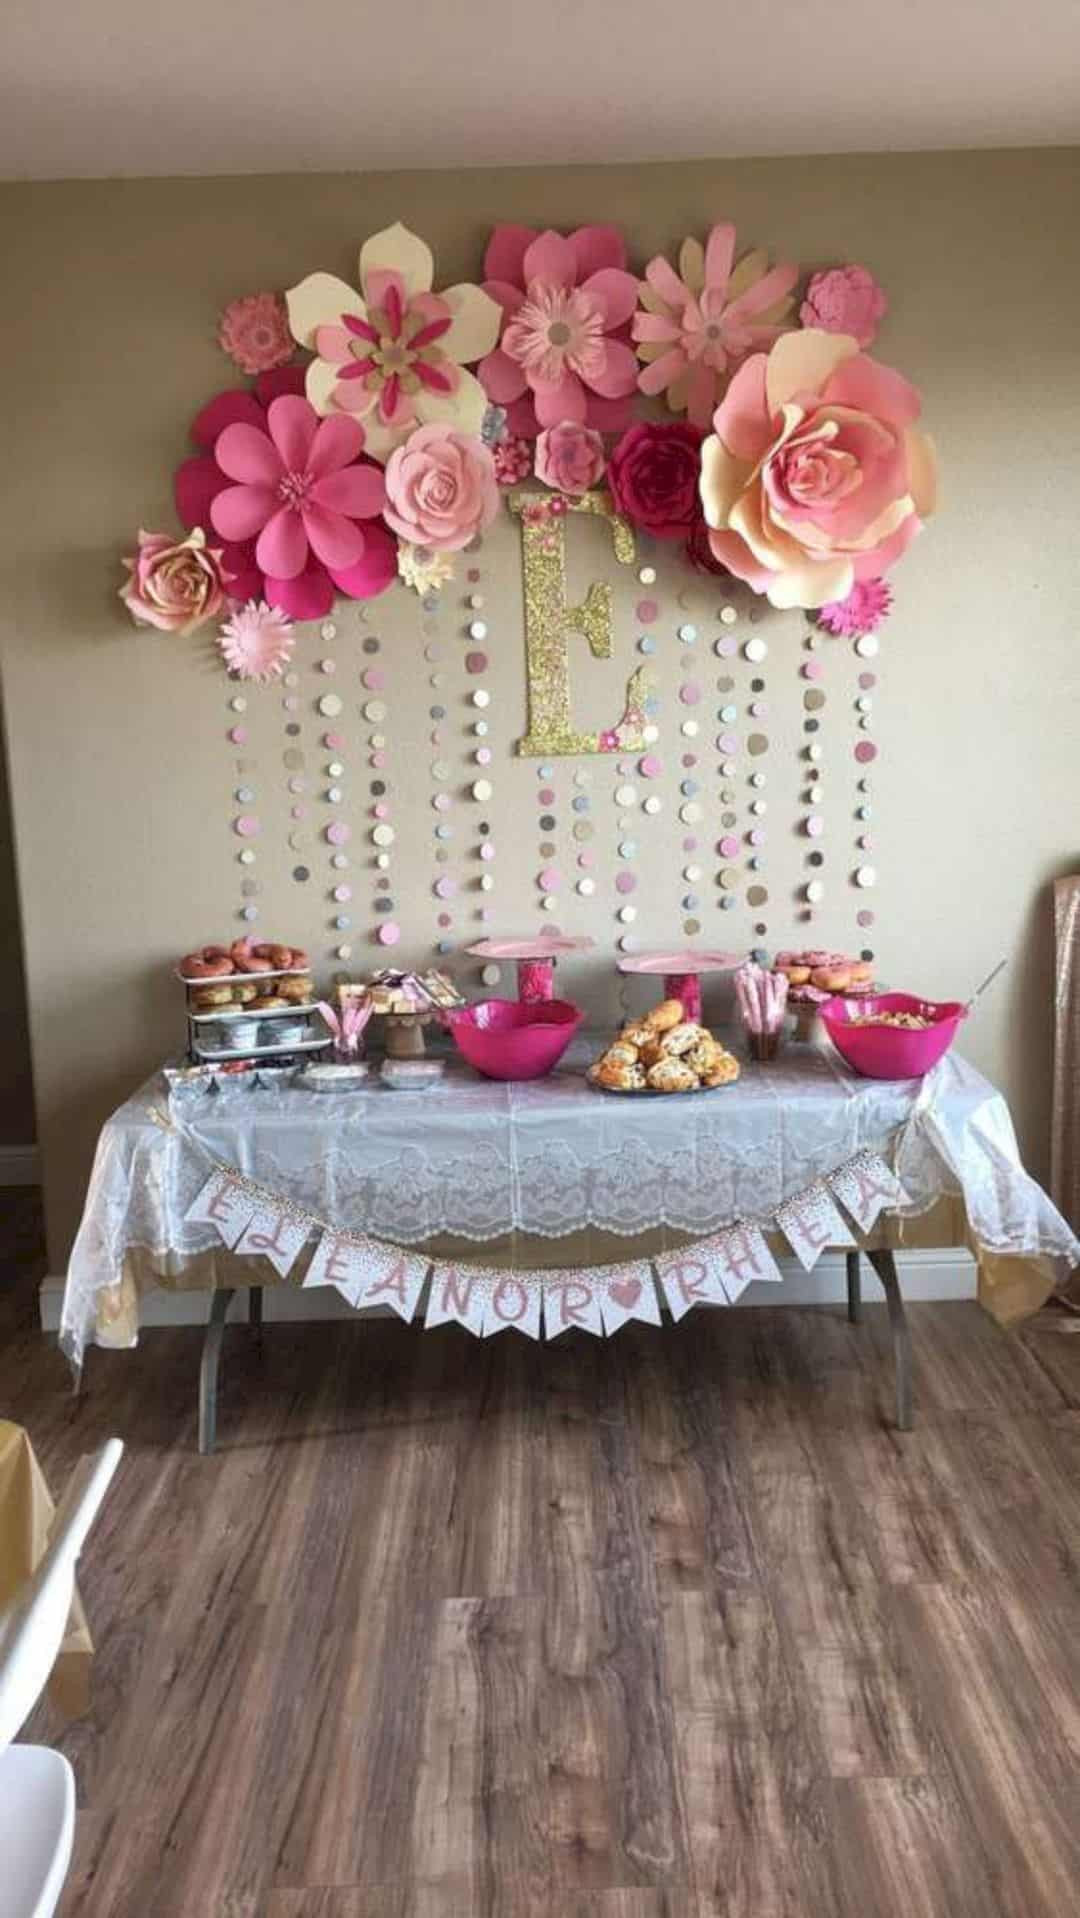 Baby Shower Decorating Ideas
 16 Cute Baby Shower Decorating Ideas